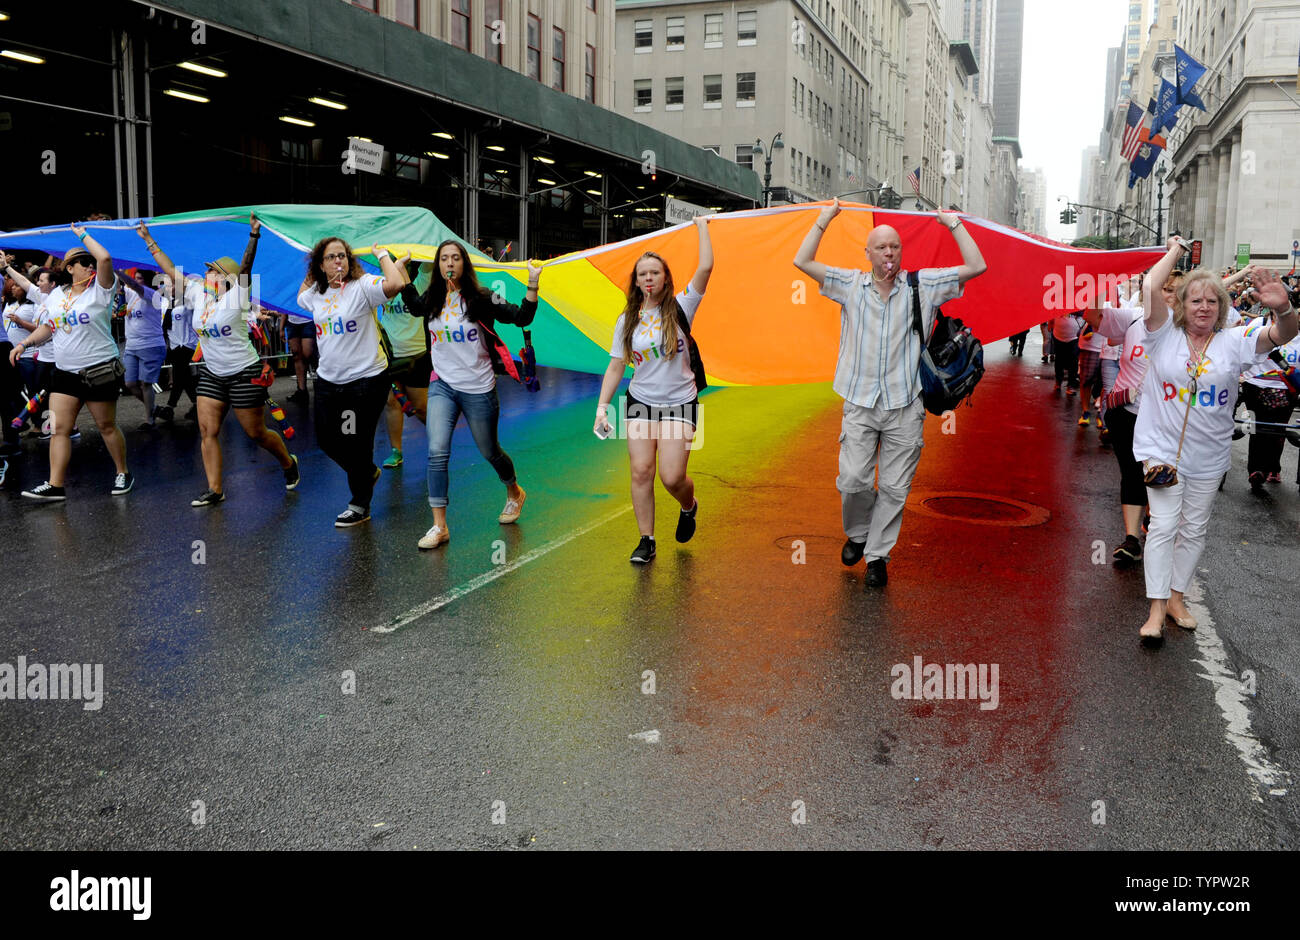 Participants march carrying a giant Rainbow Flag at the 2015 NYC Gay Pride March in New York City on June 28, 2015. The parade comes 2 days after the US Supreme Court rules gay marriage is legal nationwide The ruling, which sparked celebrations outside the court in Washington DC, brings to an end more than a decade of bitter legal battles.       Photo by Dennis Van Tine/UPI Stock Photo